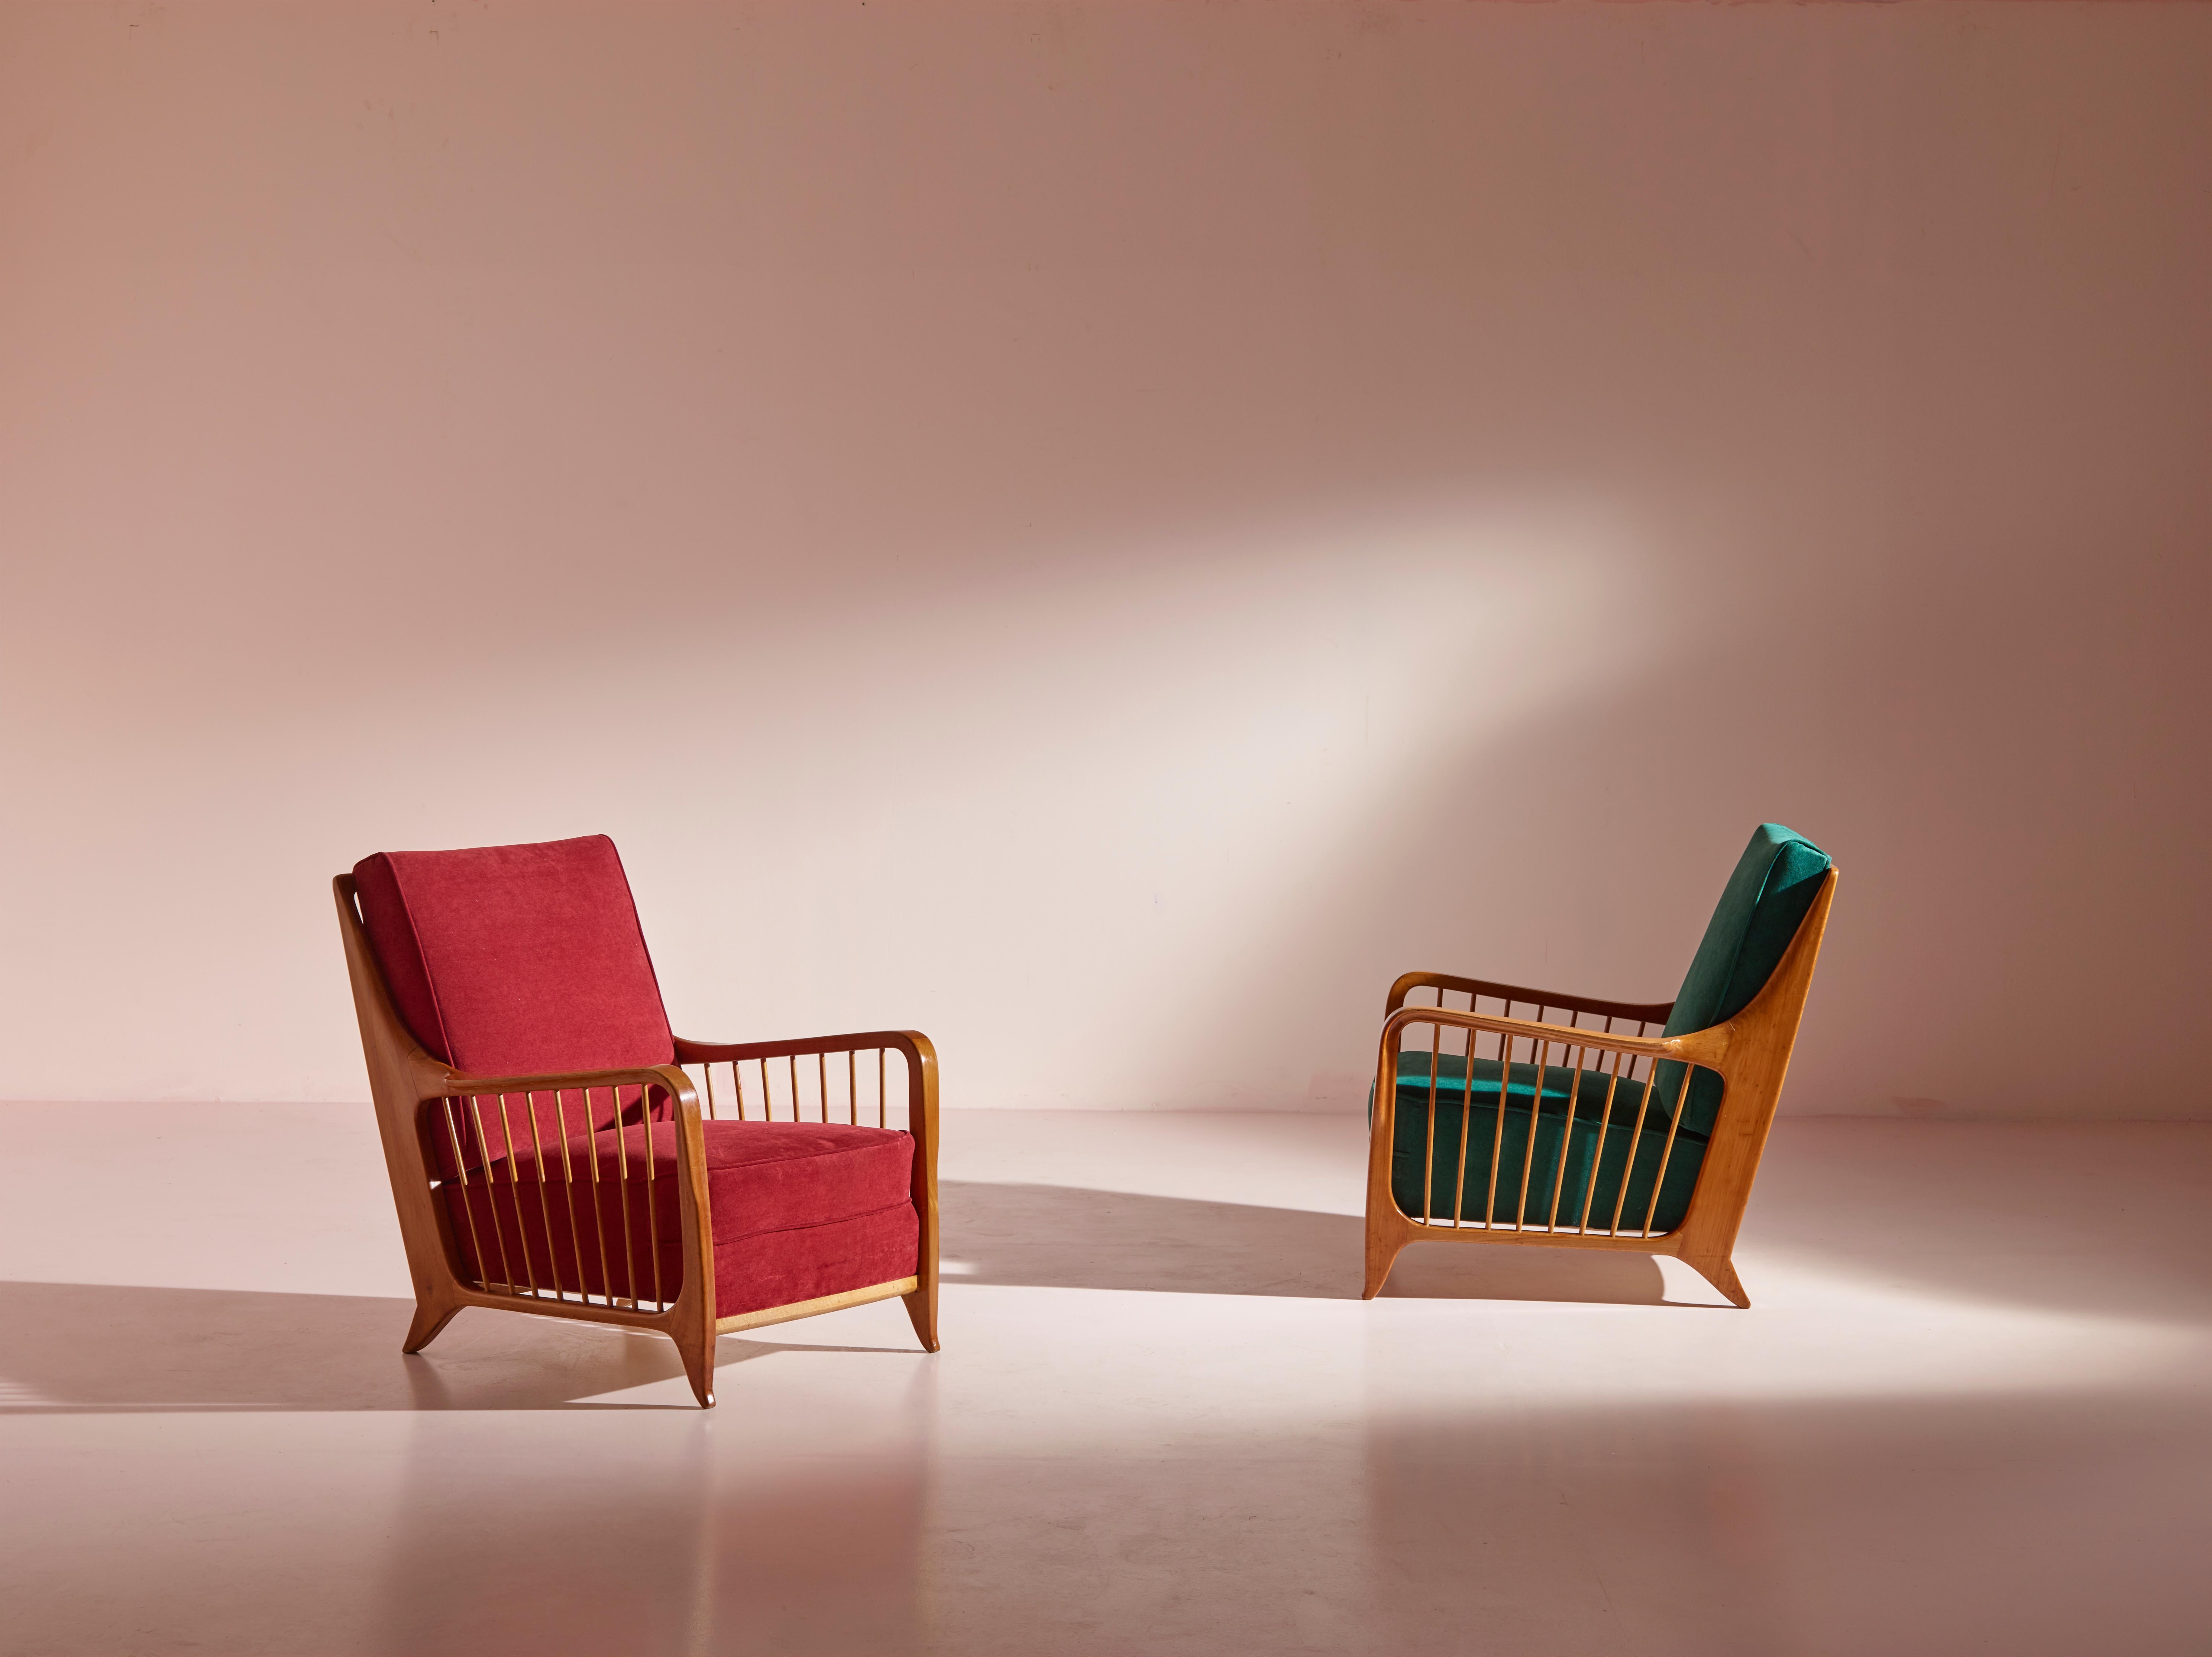 An exceptional and rare pair of armchairs, the Model 118/f by renowned Italian designer Paolo Buffa. Crafted during the 1950s in Italy, these armchairs are not just pieces of furniture; they are masterpieces of design and craftsmanship, making them